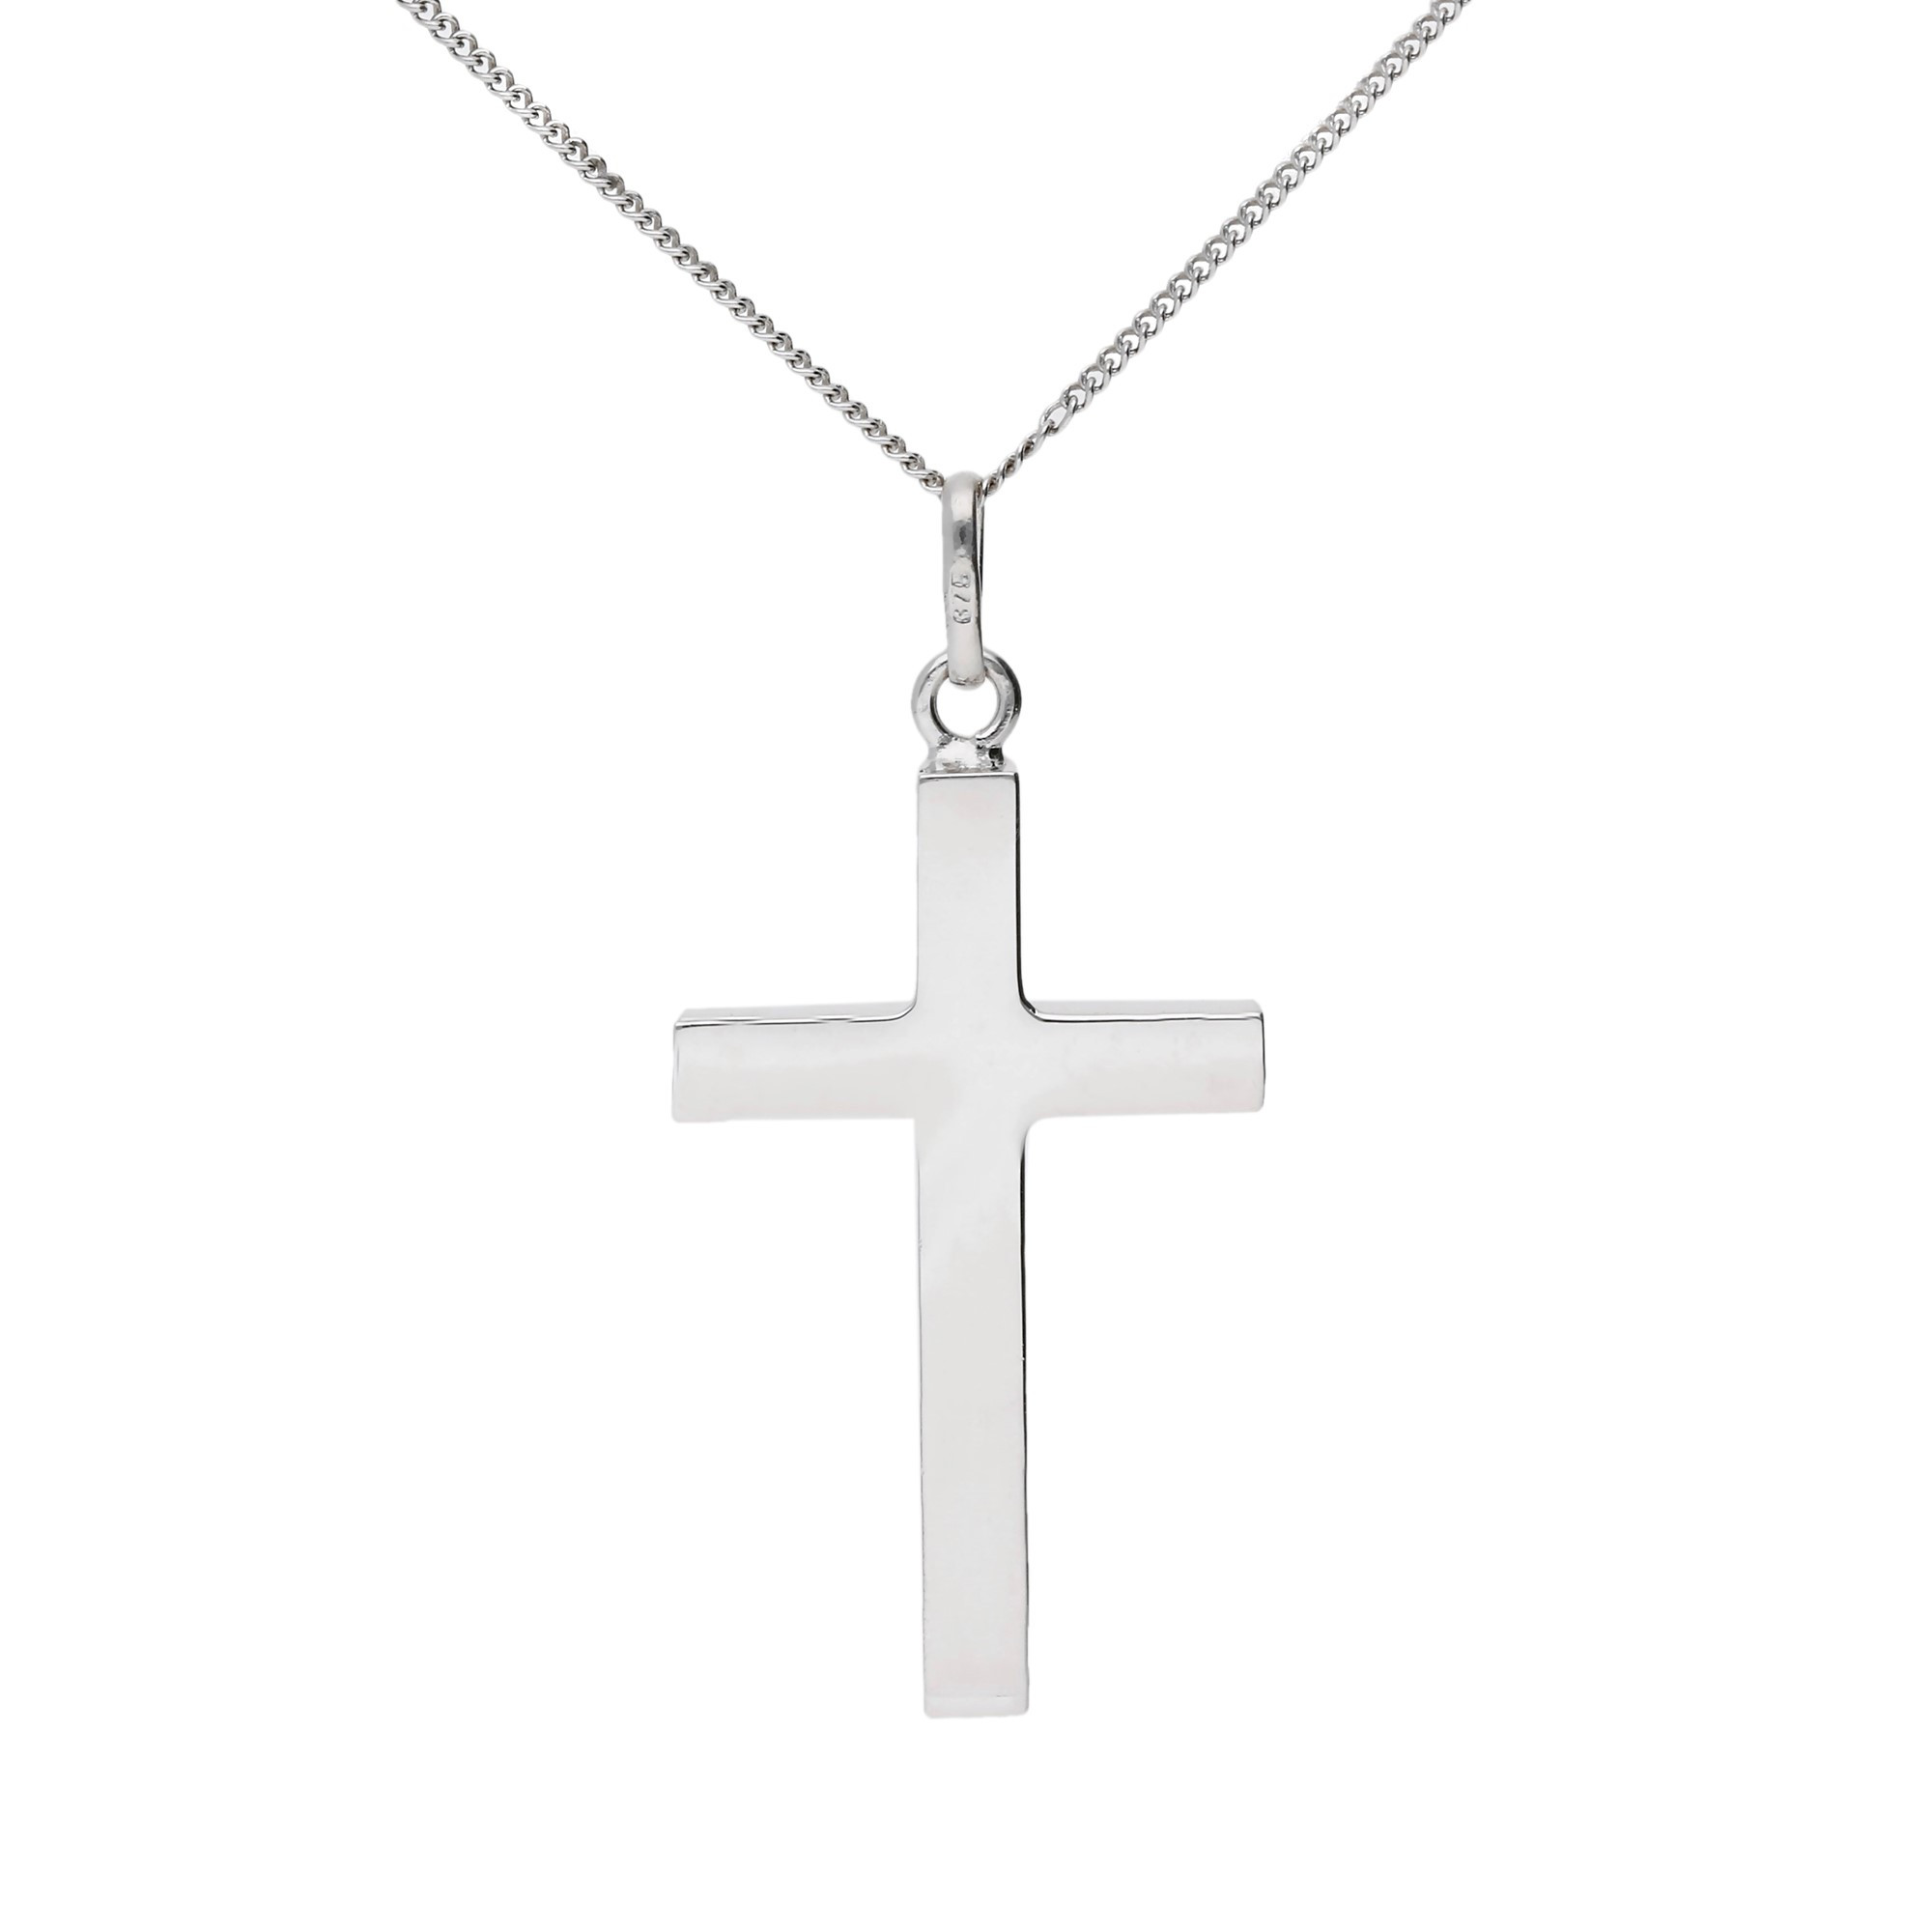 9ct White Gold Cross Pendant | Buy Online | Free Insured UK Delivery